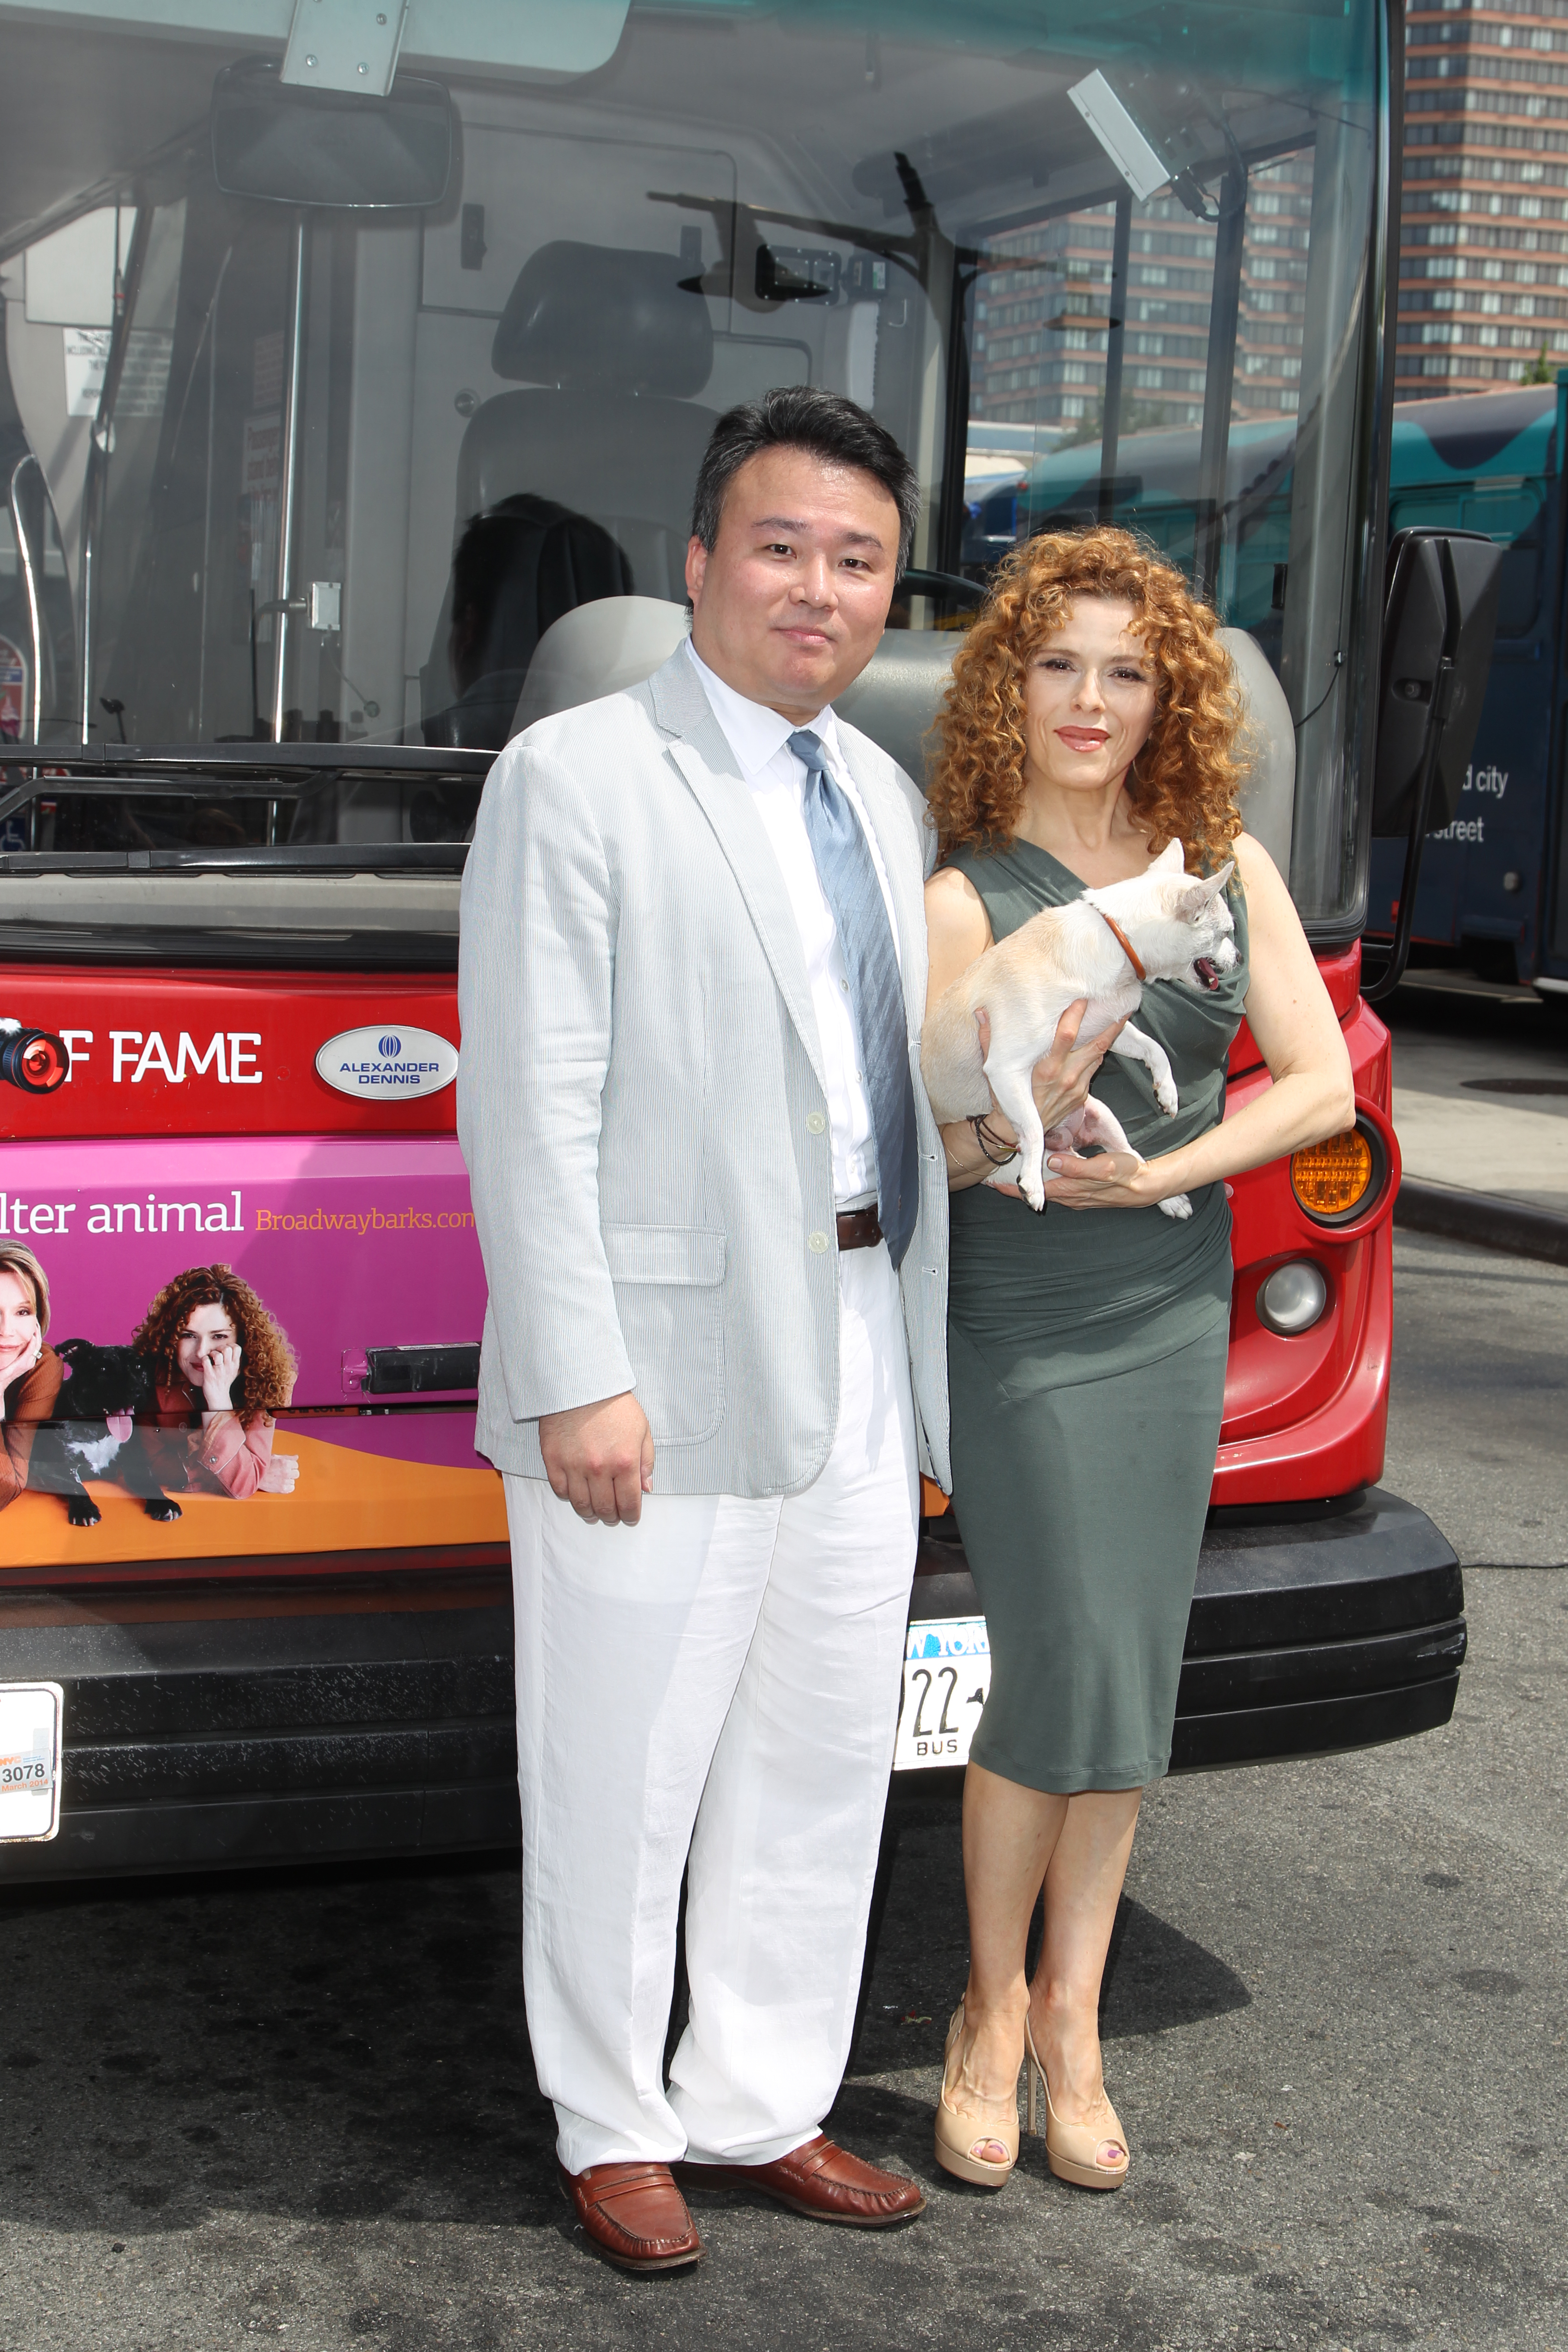 David W. Chien poses with Ride of Fame Honoree Bernadette Peters (August 21st, 2012).